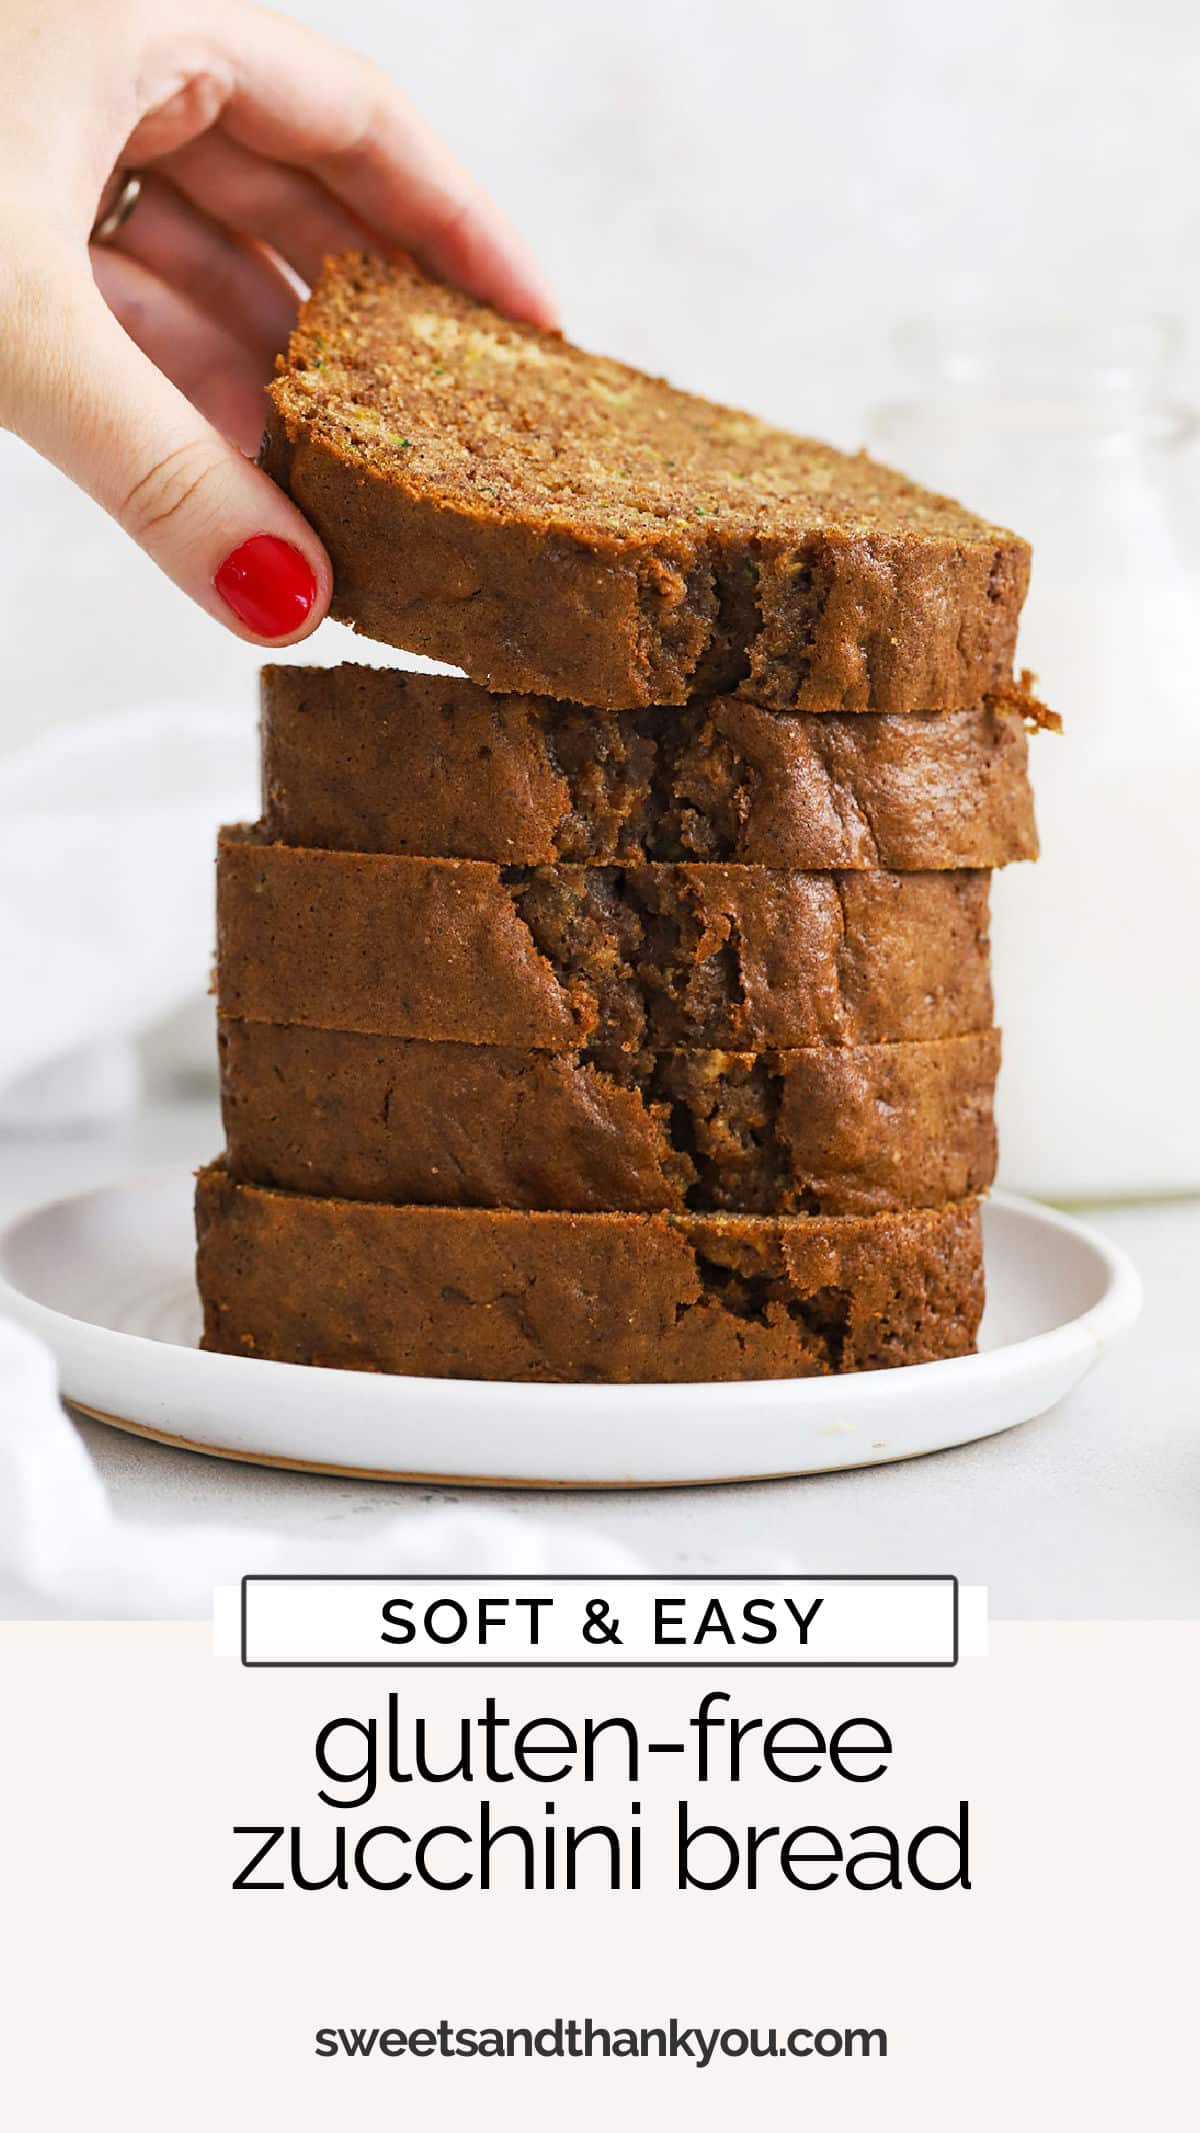 Summer is the perfect time to make this easy gluten-free zucchini bread recipe! You'll love the blend of spices, soft texture, and chocolate chips (or nuts) in every bite! / moist gluten free zucchini bread recipe / the best gluten-free zucchini bread recipe / gluten free chocolate chip zucchini bread / gluten free zucchini bread with walnuts /